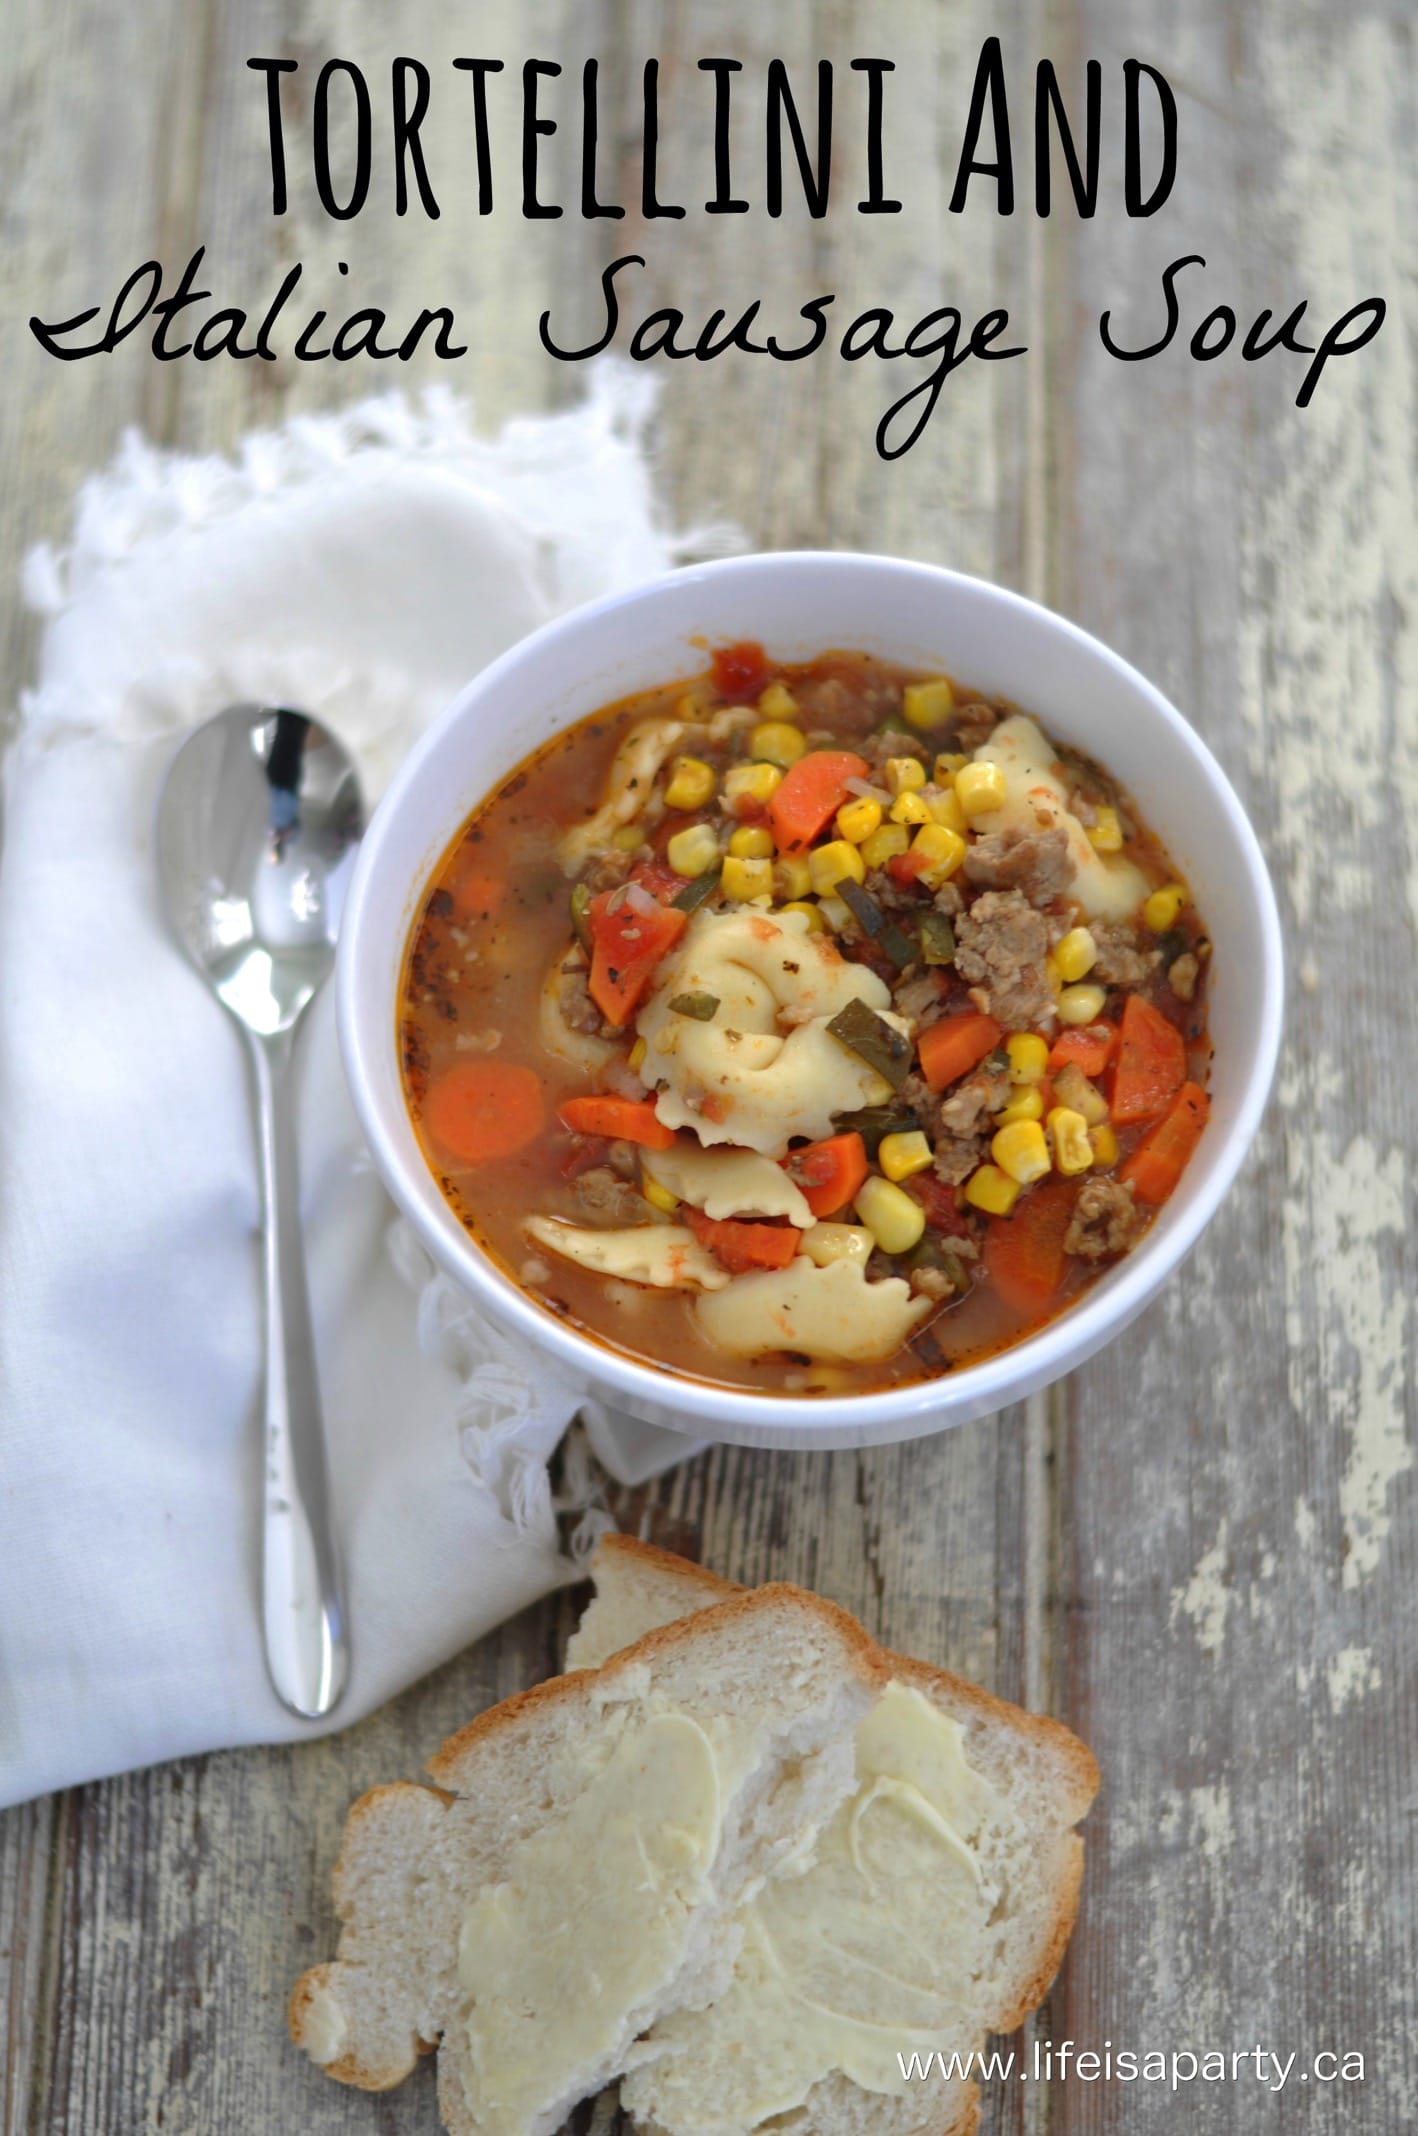 Tortellini and Italian Sausage Soup: this hearty soup is a real crowd pleaser with tender pasta, loads of veggies, and delicious Italian sausage. Easy and sure to become a family favourite.